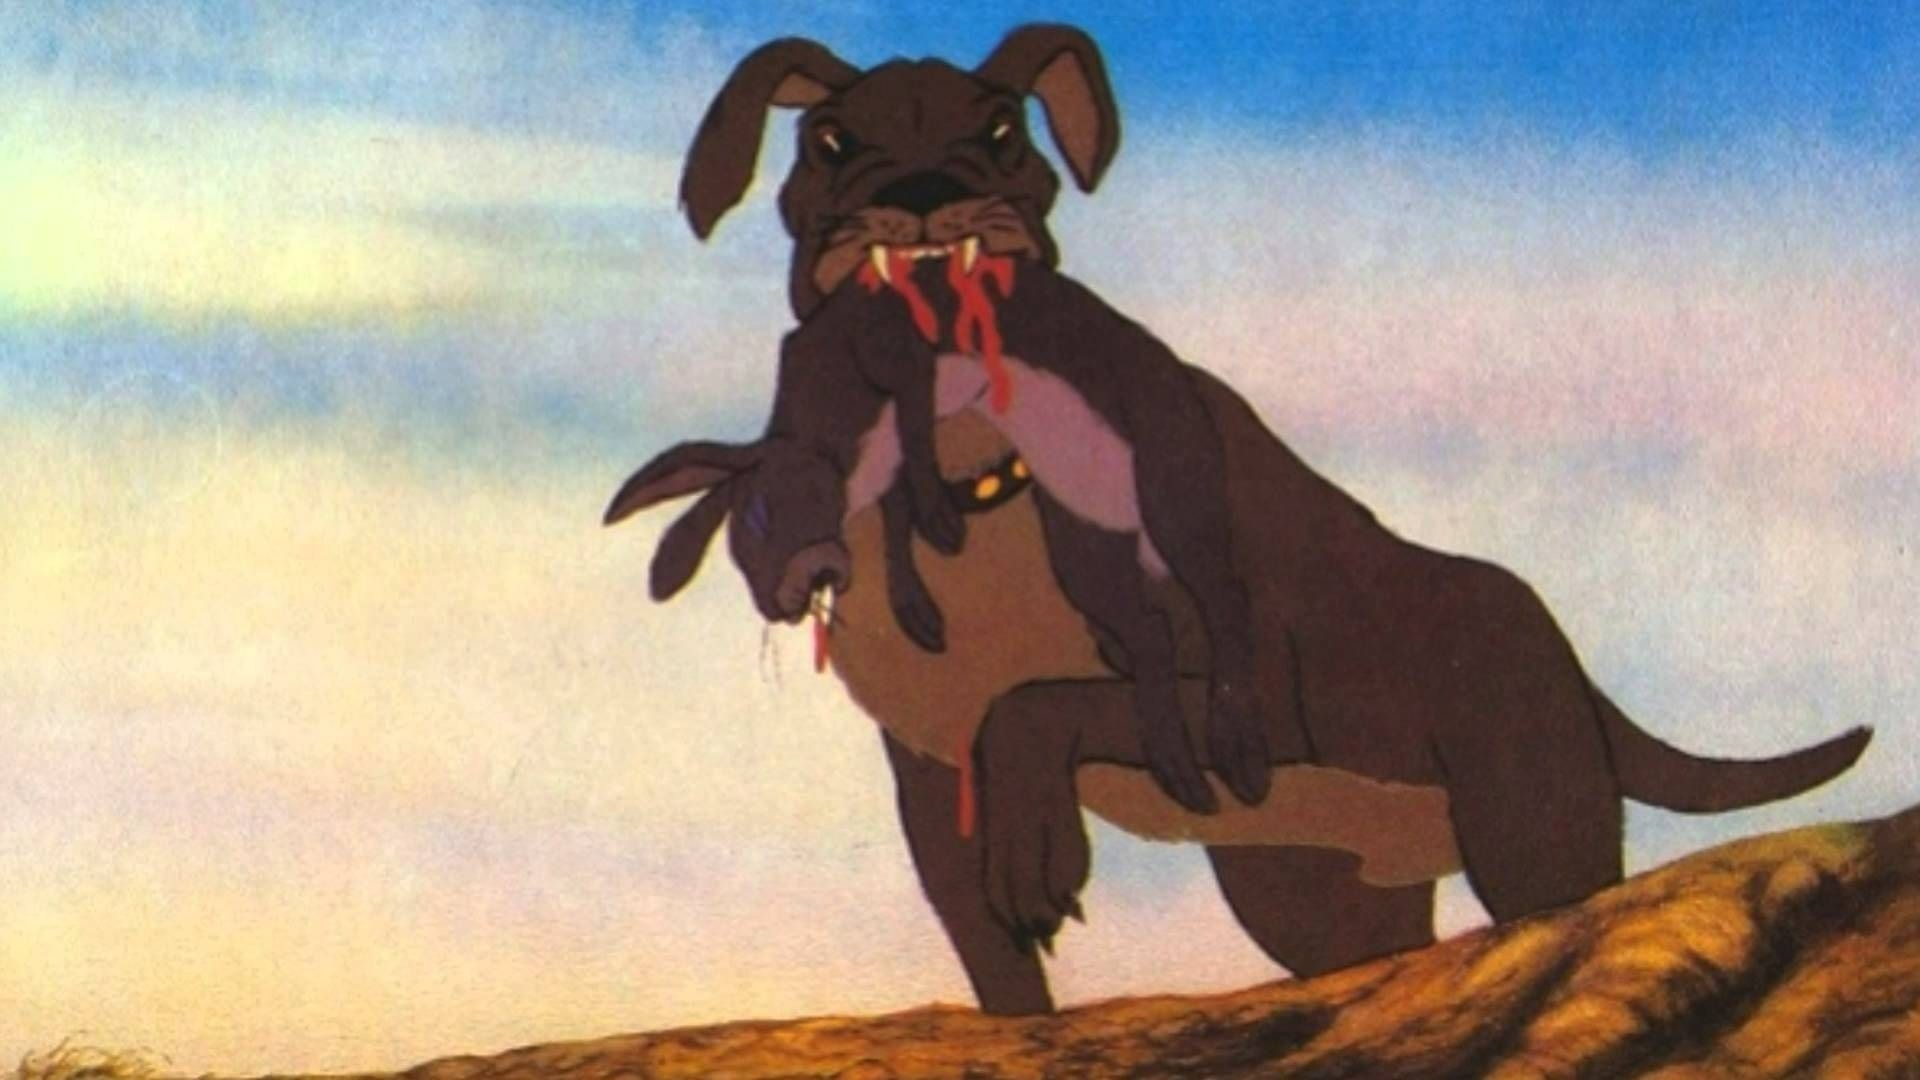 A rabid dog carries a bloody rabbit in its mouth